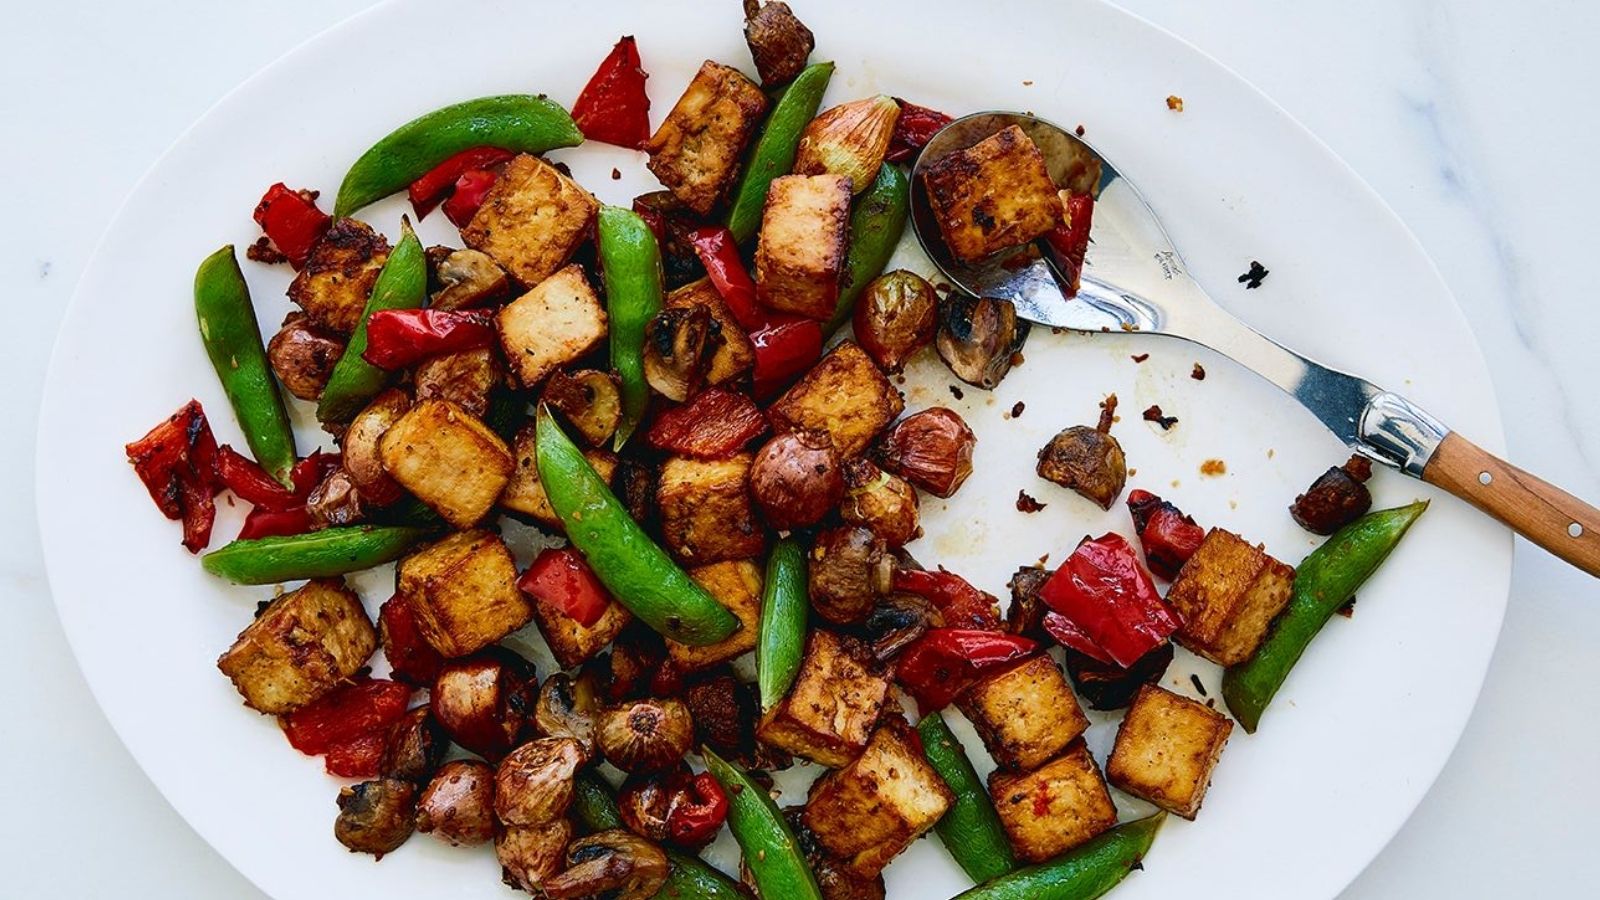 Plate of golden tofu with green sugarsnap peas and red peppers